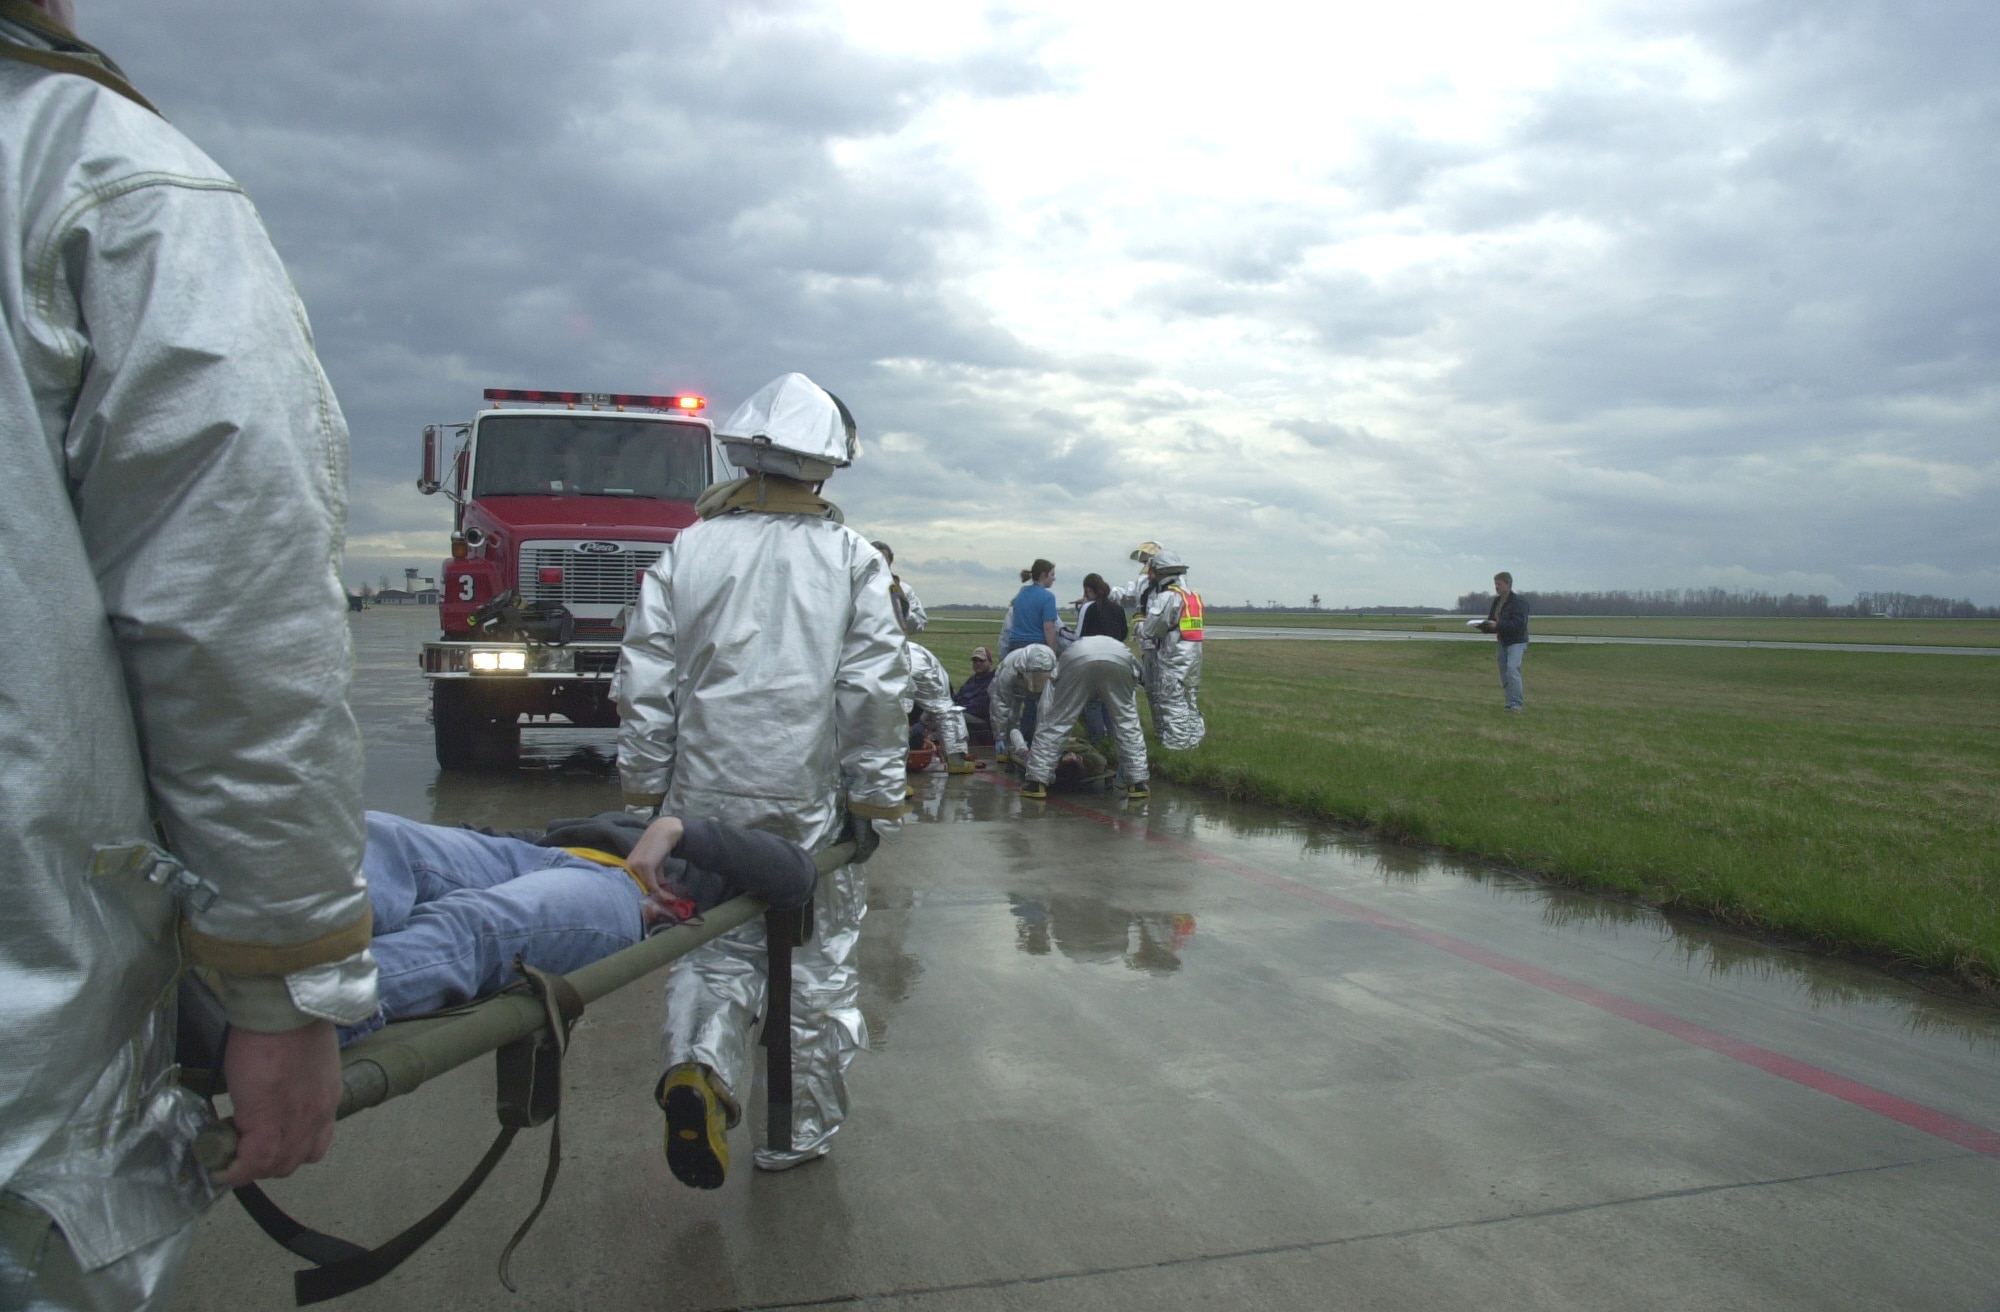 YOUNGSTOWN AIR RESERVE STATION, Ohio - Fire fighters from the 910th Civil Engineers Squadron here, carry a simulated patient to the patient staging area.  The fire fighters were participating in a disaster preparedness exercise that involved the base working in conjunction with about a dozen law enforcement and emergency response agencies from the Northeastern Ohio. (U.S. Air Force Photo/Tech. Sgt. Ken Sloat)   